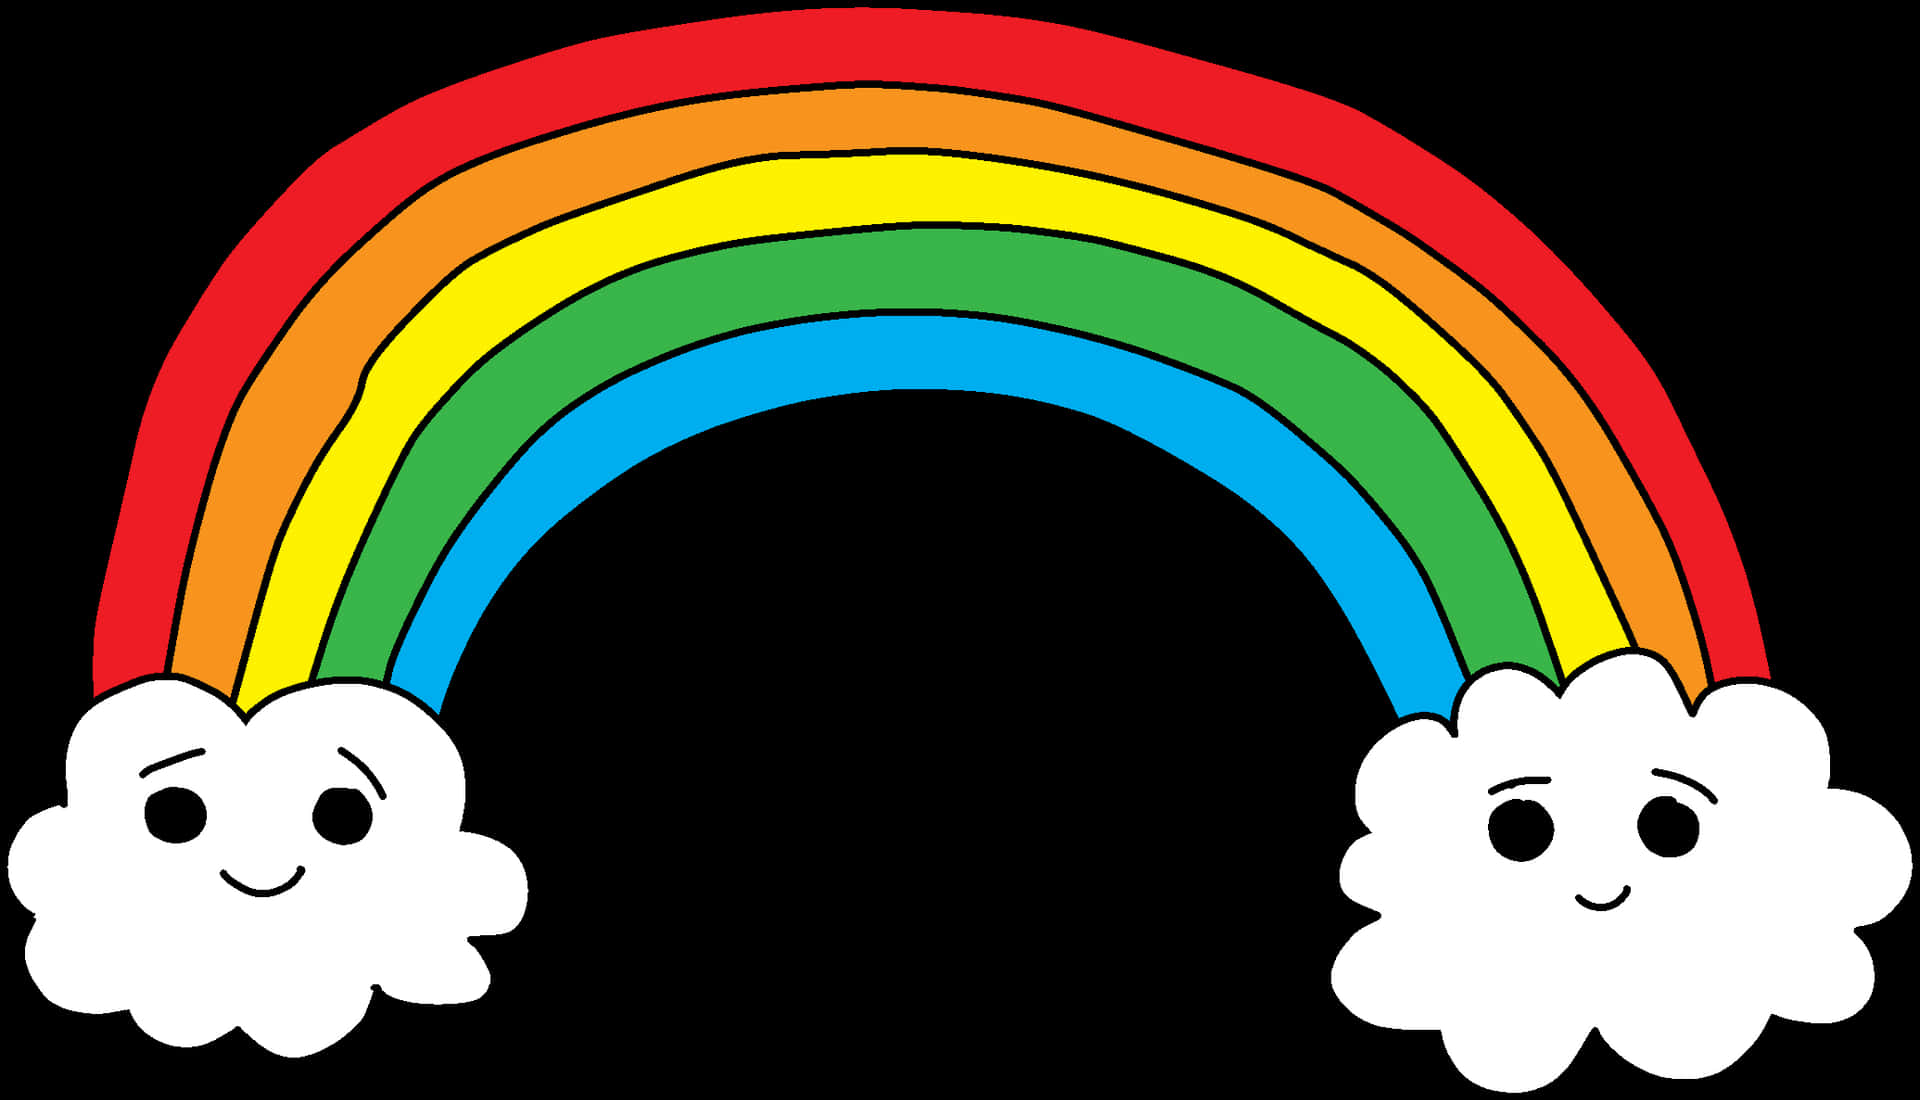 Cartoon Rainbow With Clouds PNG image